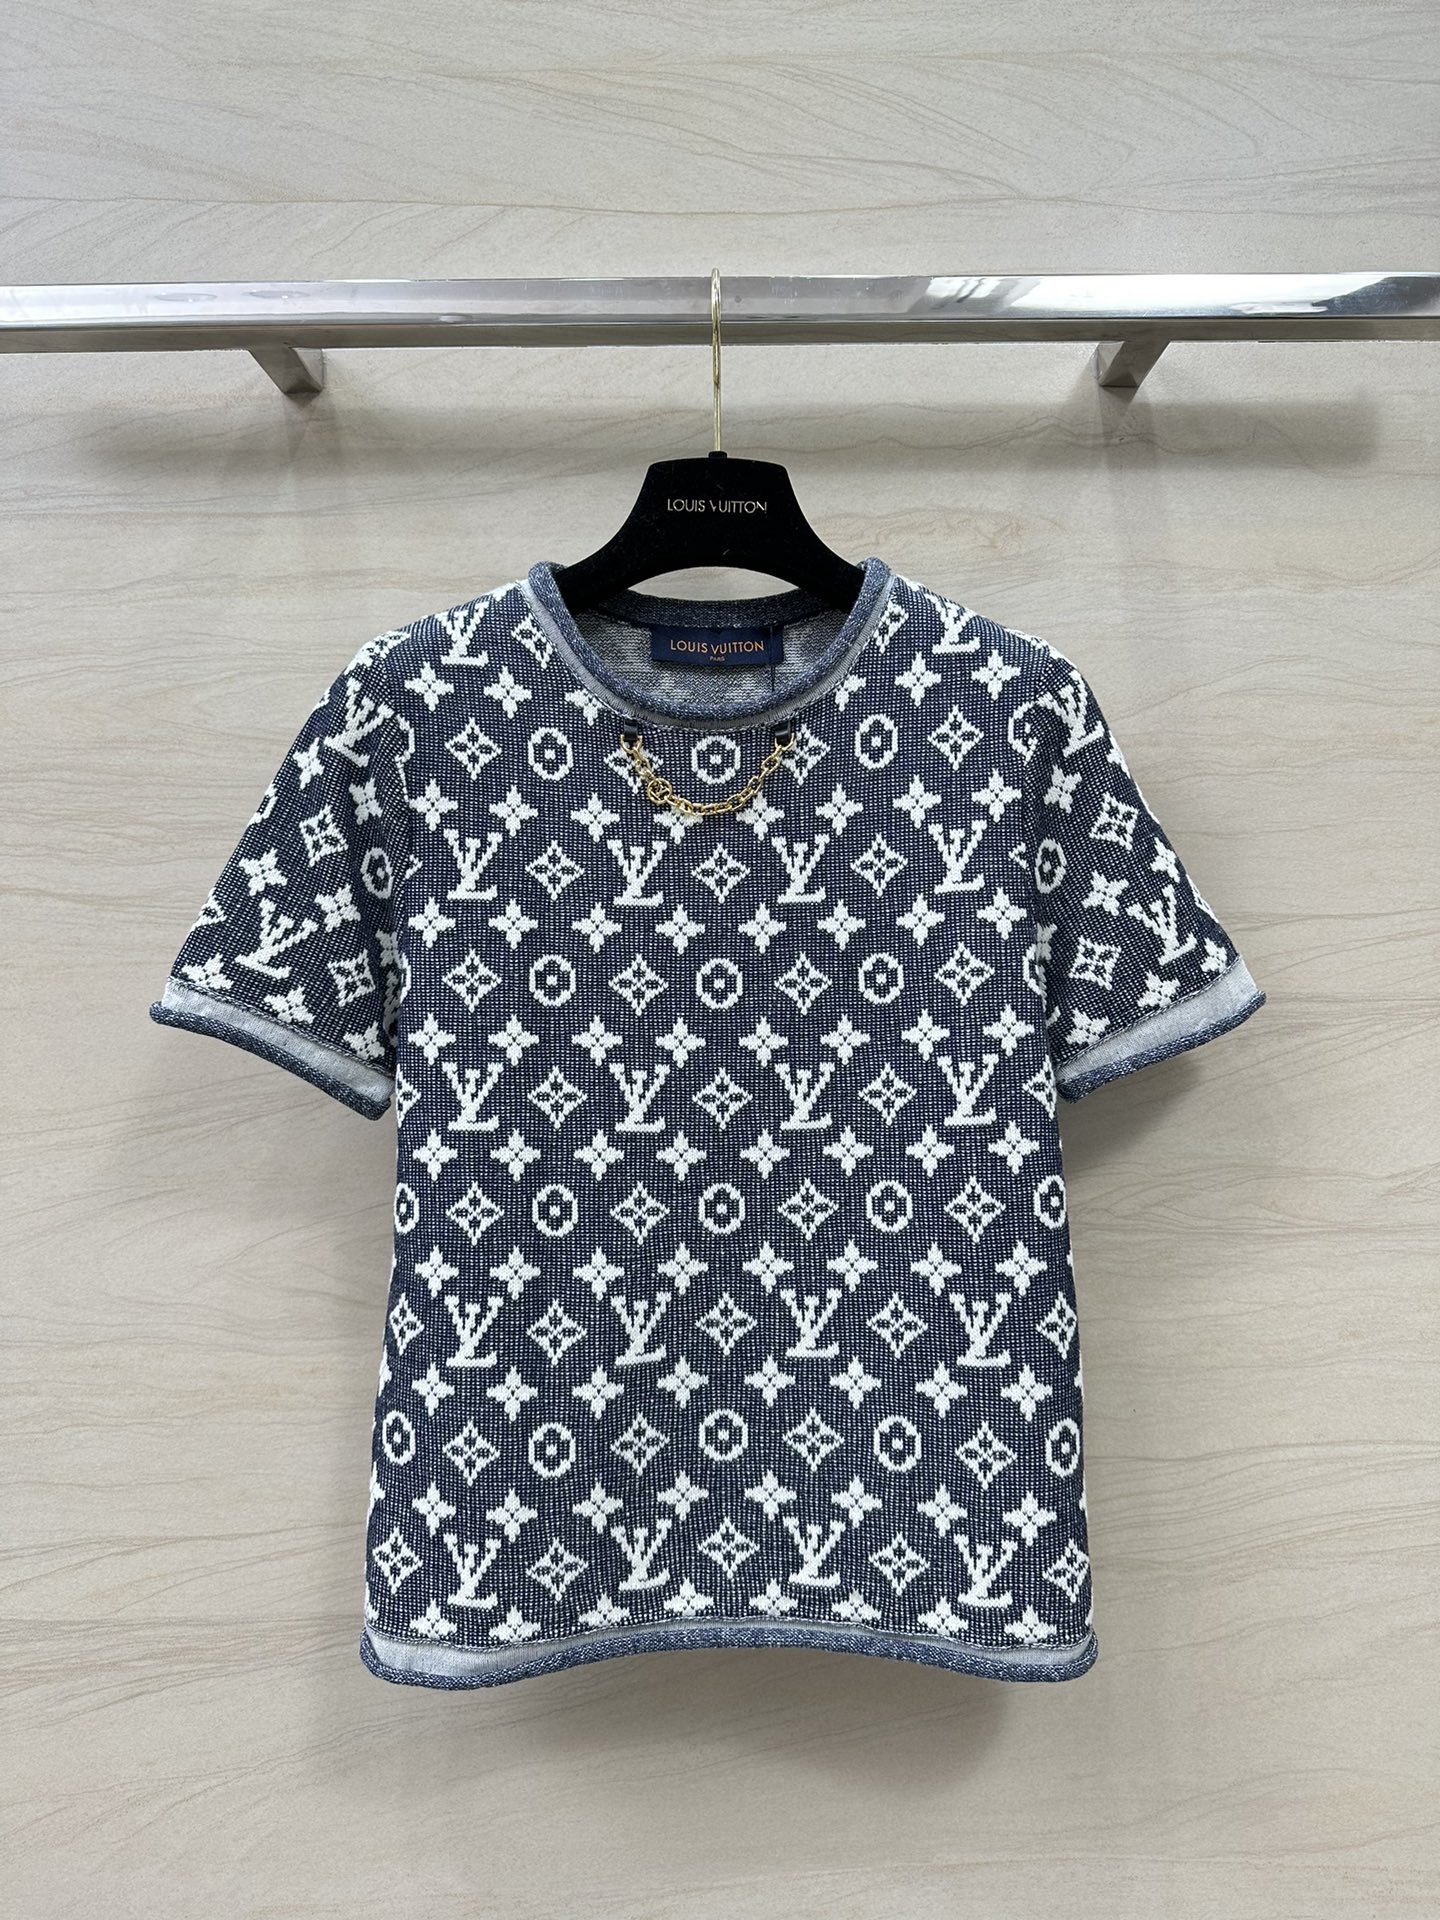 Louis Vuitton Clothing Shirts & Blouses Designer Replica
 Black Blue Grey White Knitting Wool Spring Collection Chains